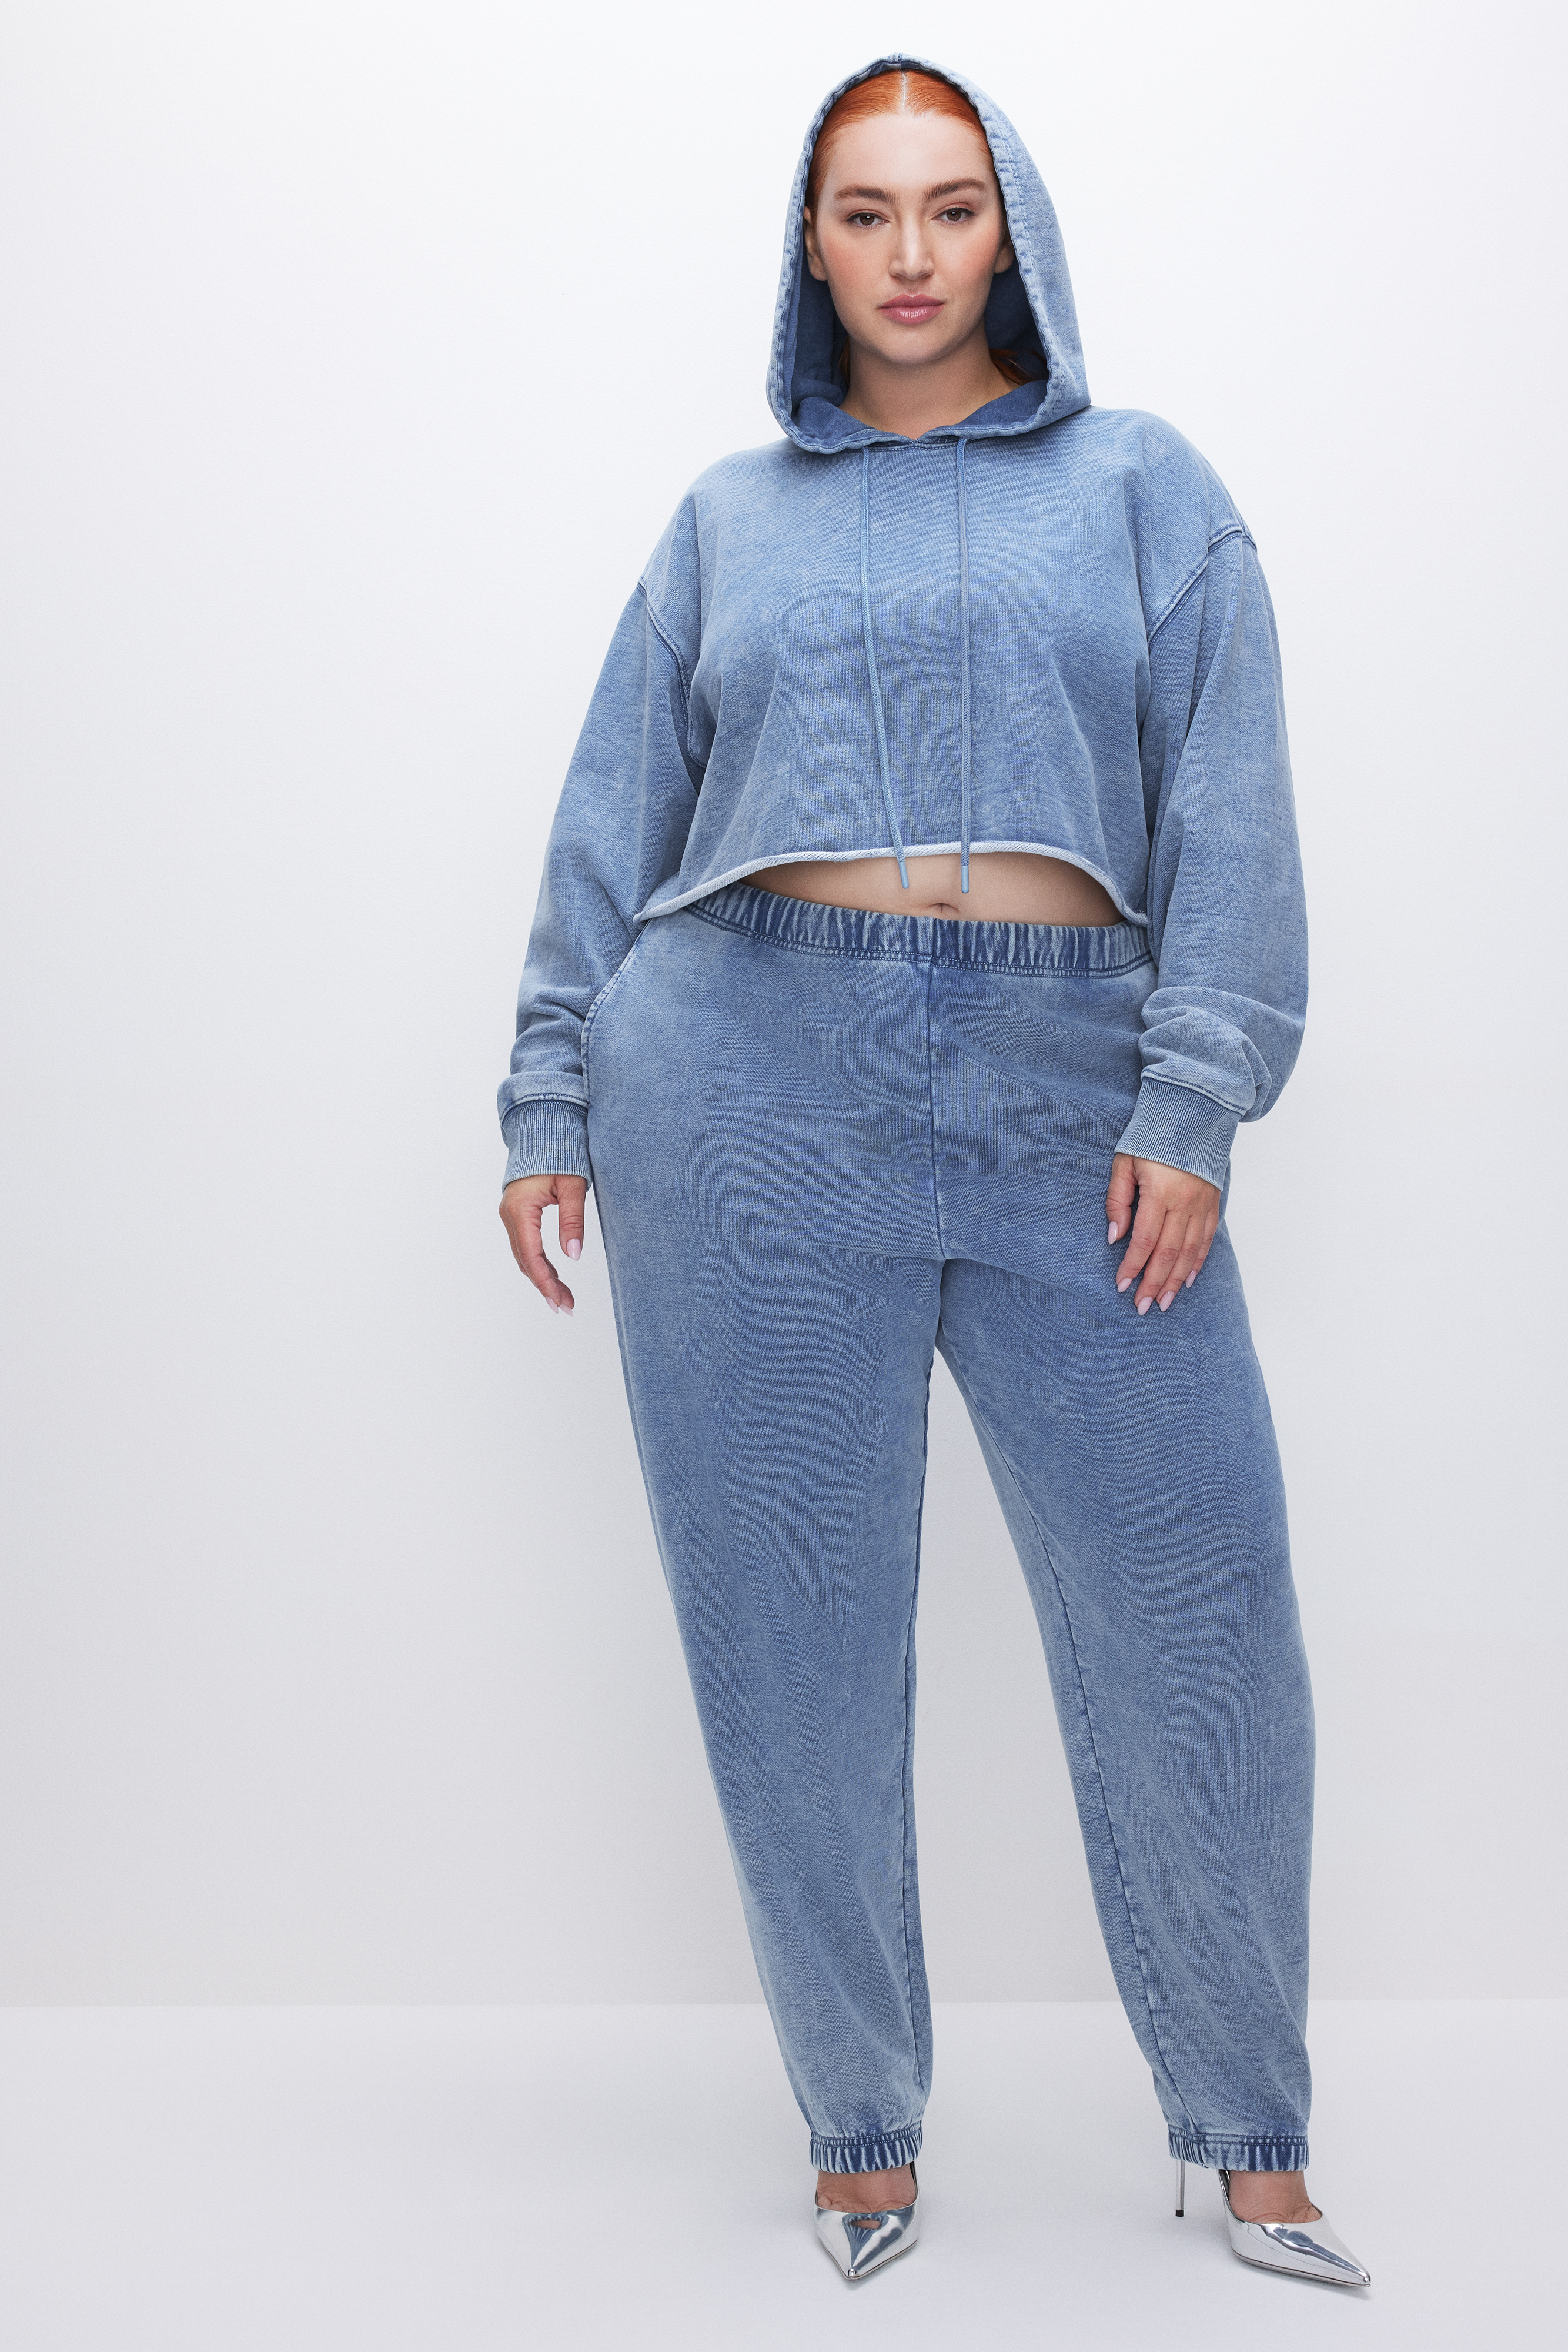 Styled with JEANIUS CROPPED HOODIE | INDIGO586